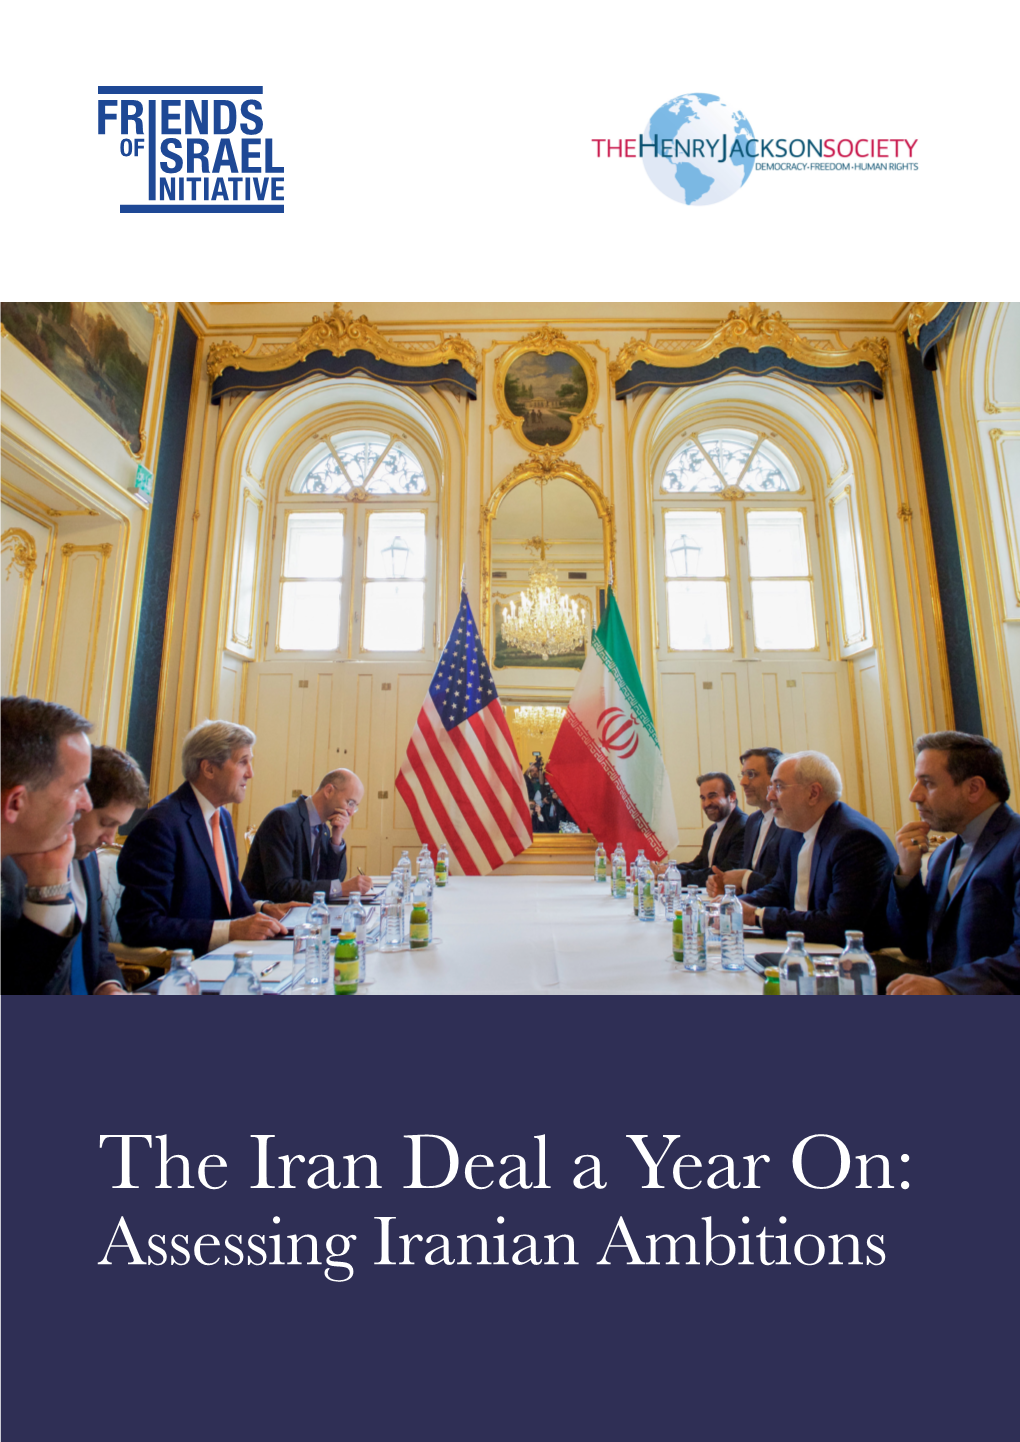 The Iran Deal a Year On: Assessing Iranian Ambitions the IRAN DEAL a YEAR ON: ASSESSING IRANIAN AMBITIONS ! Contents